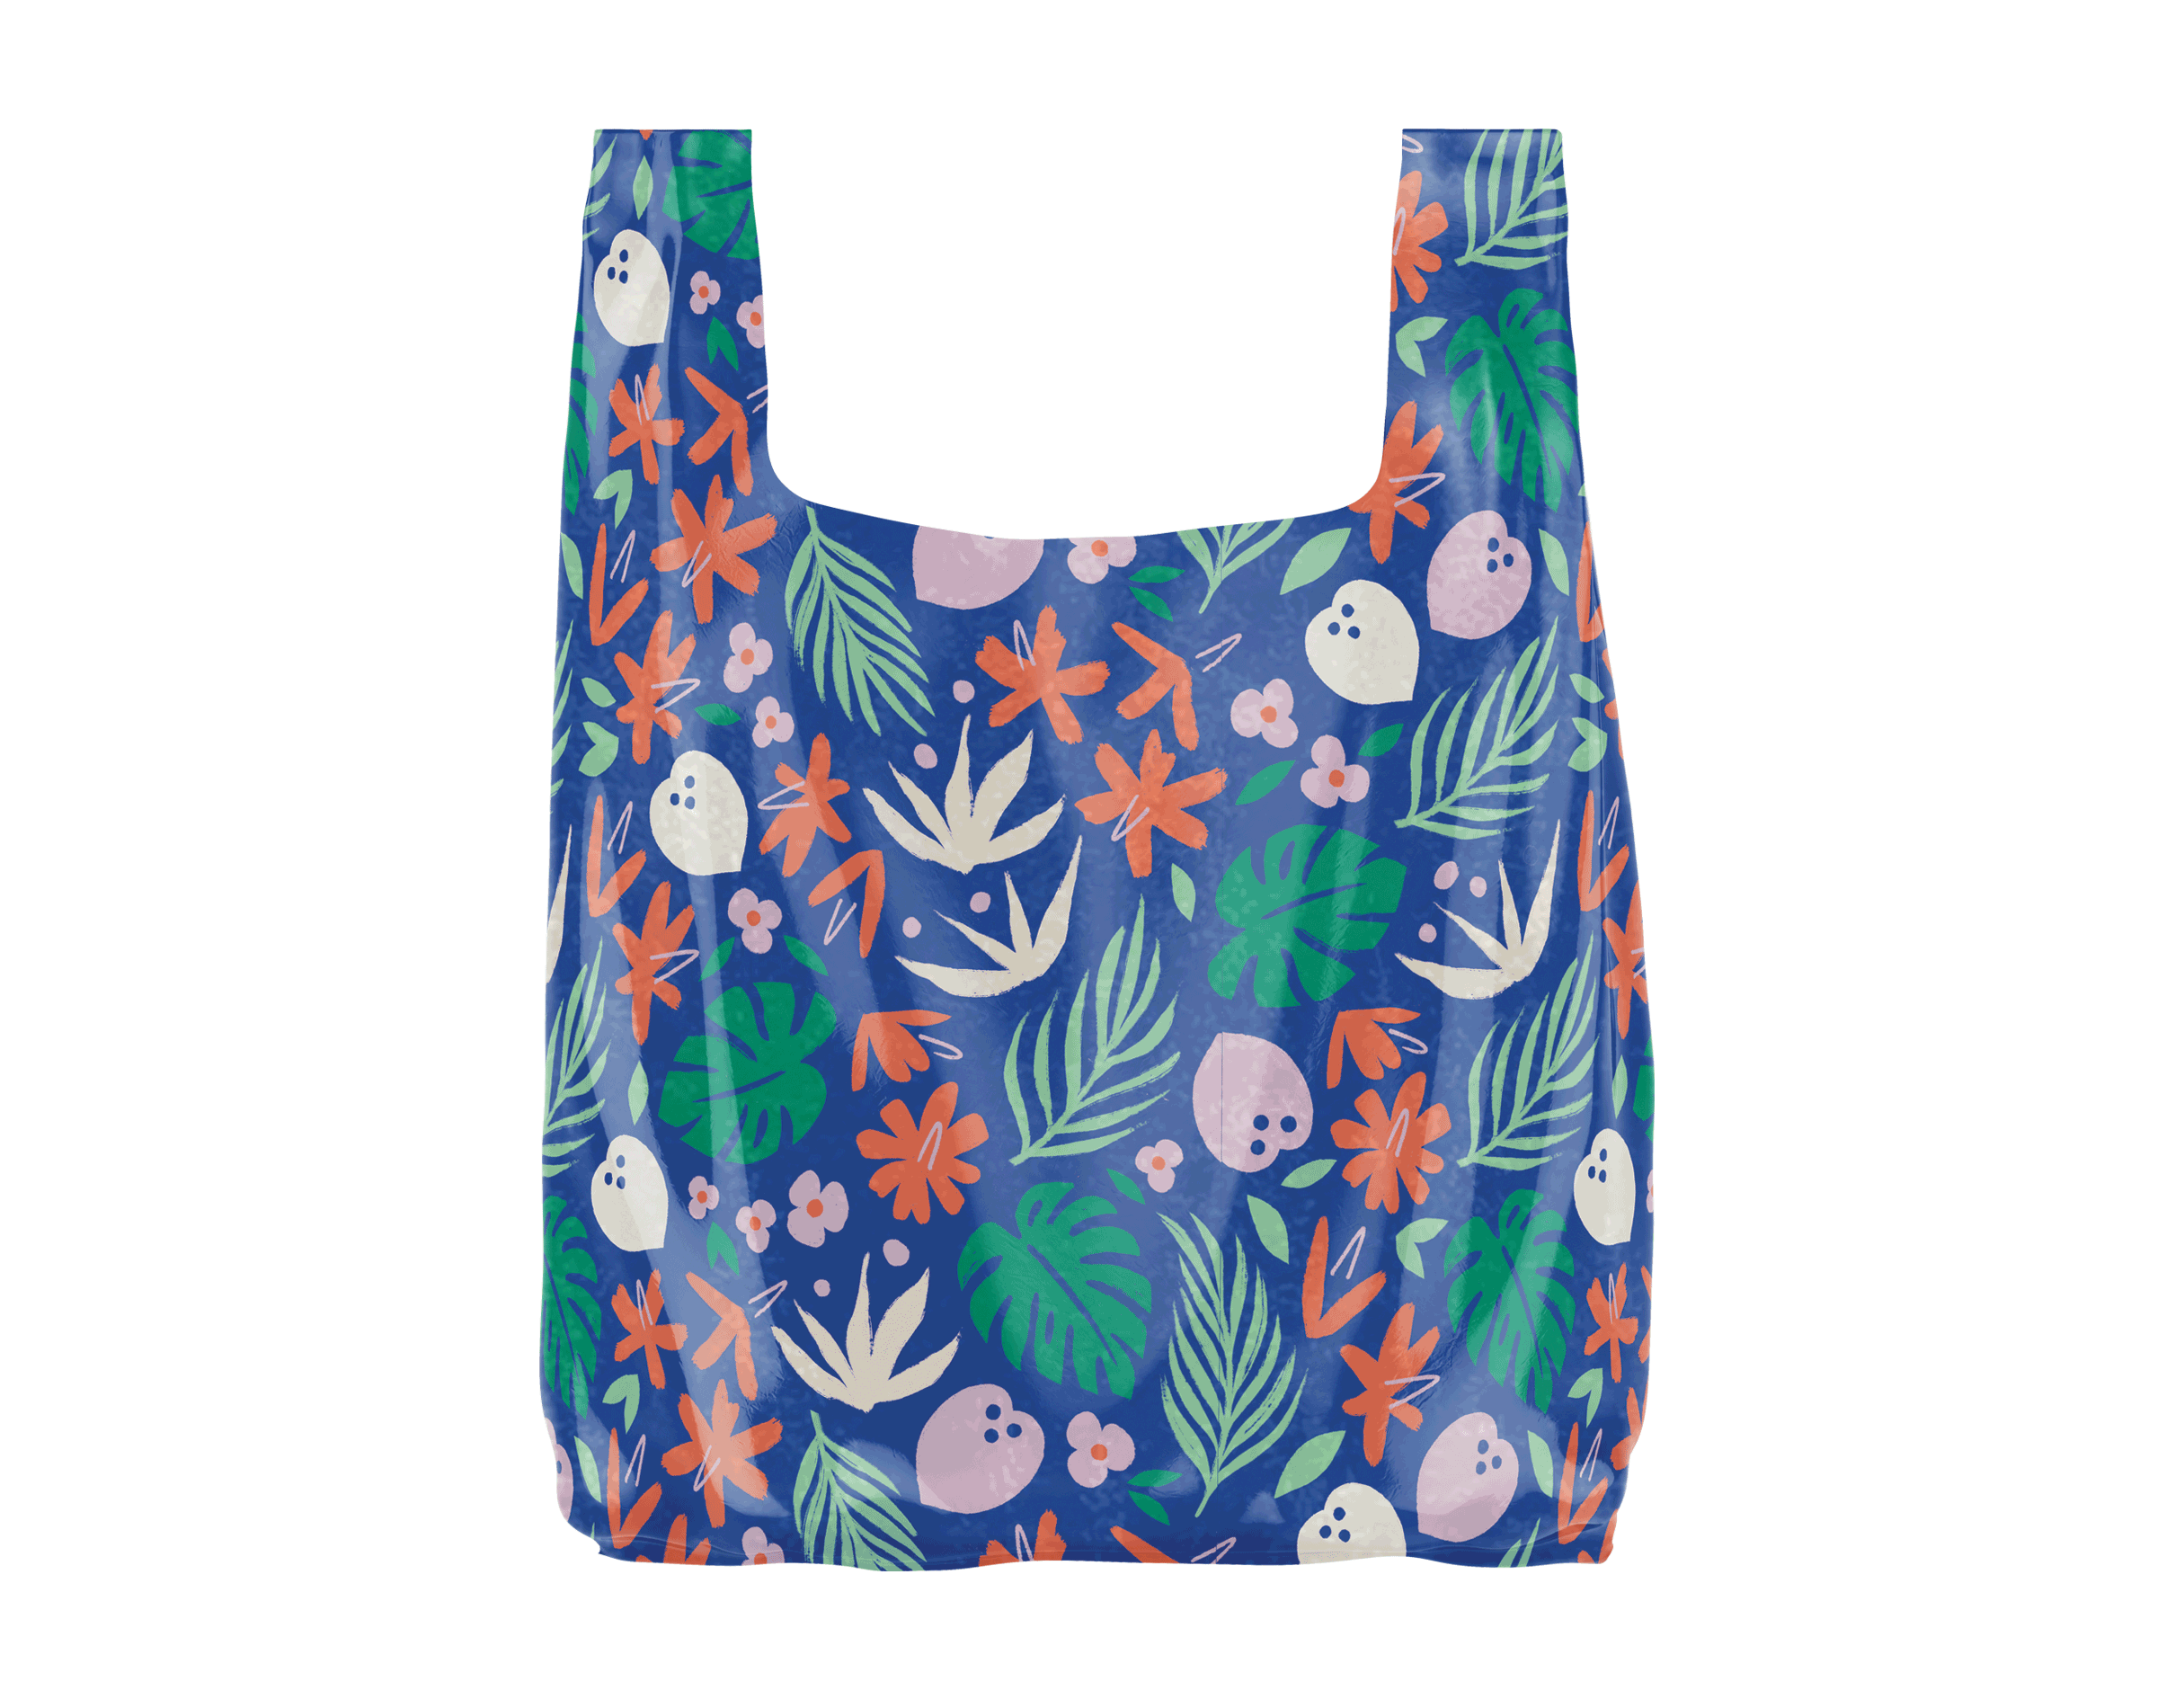 Patterned Foldable Tote